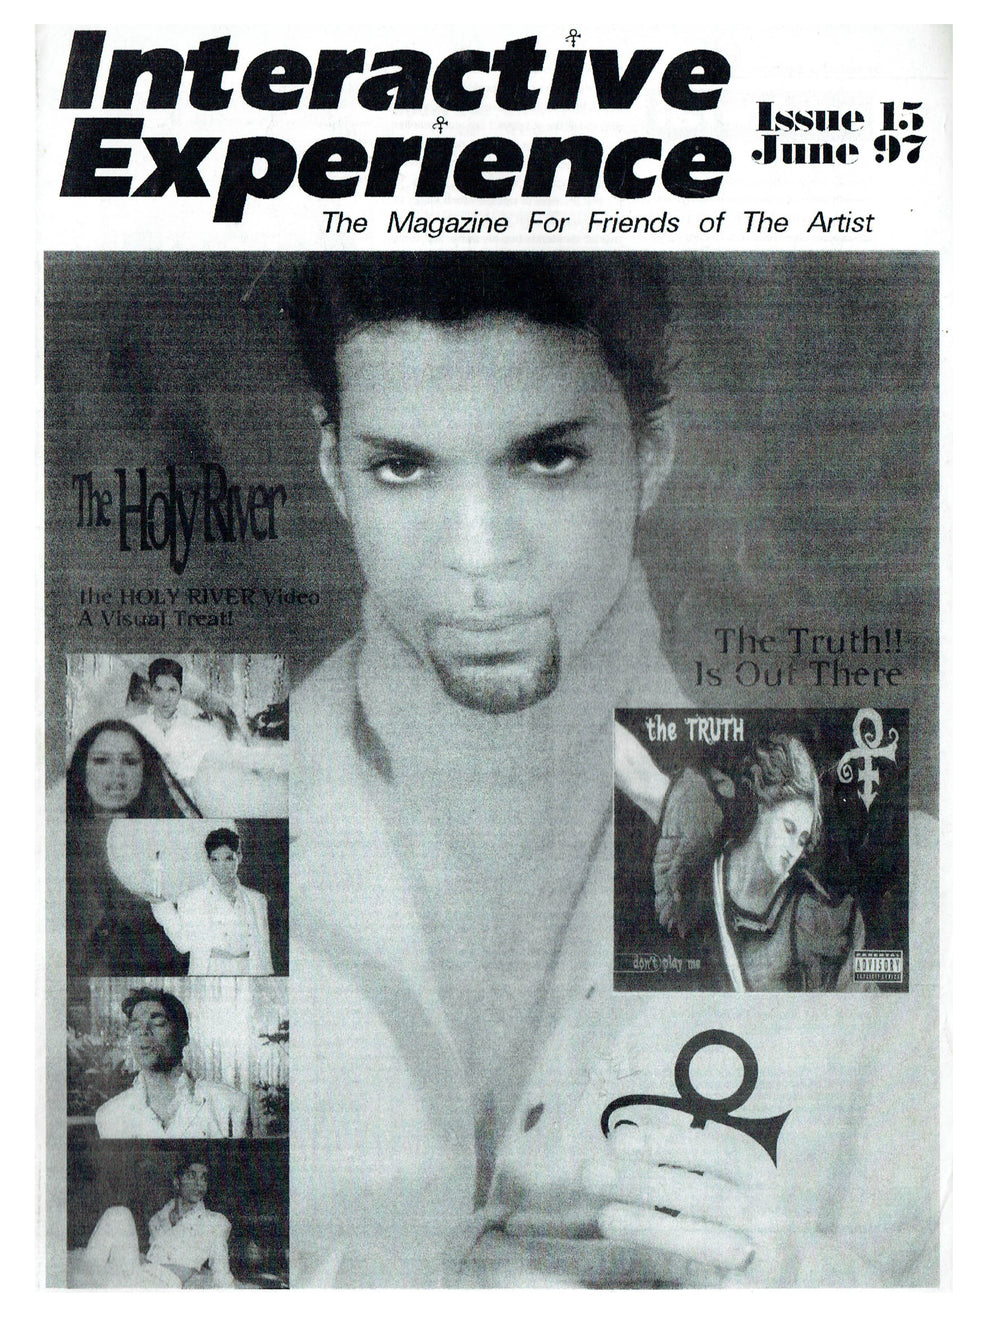 Interactive Experience Prince Fanzine Publication Issue 15 June 1997